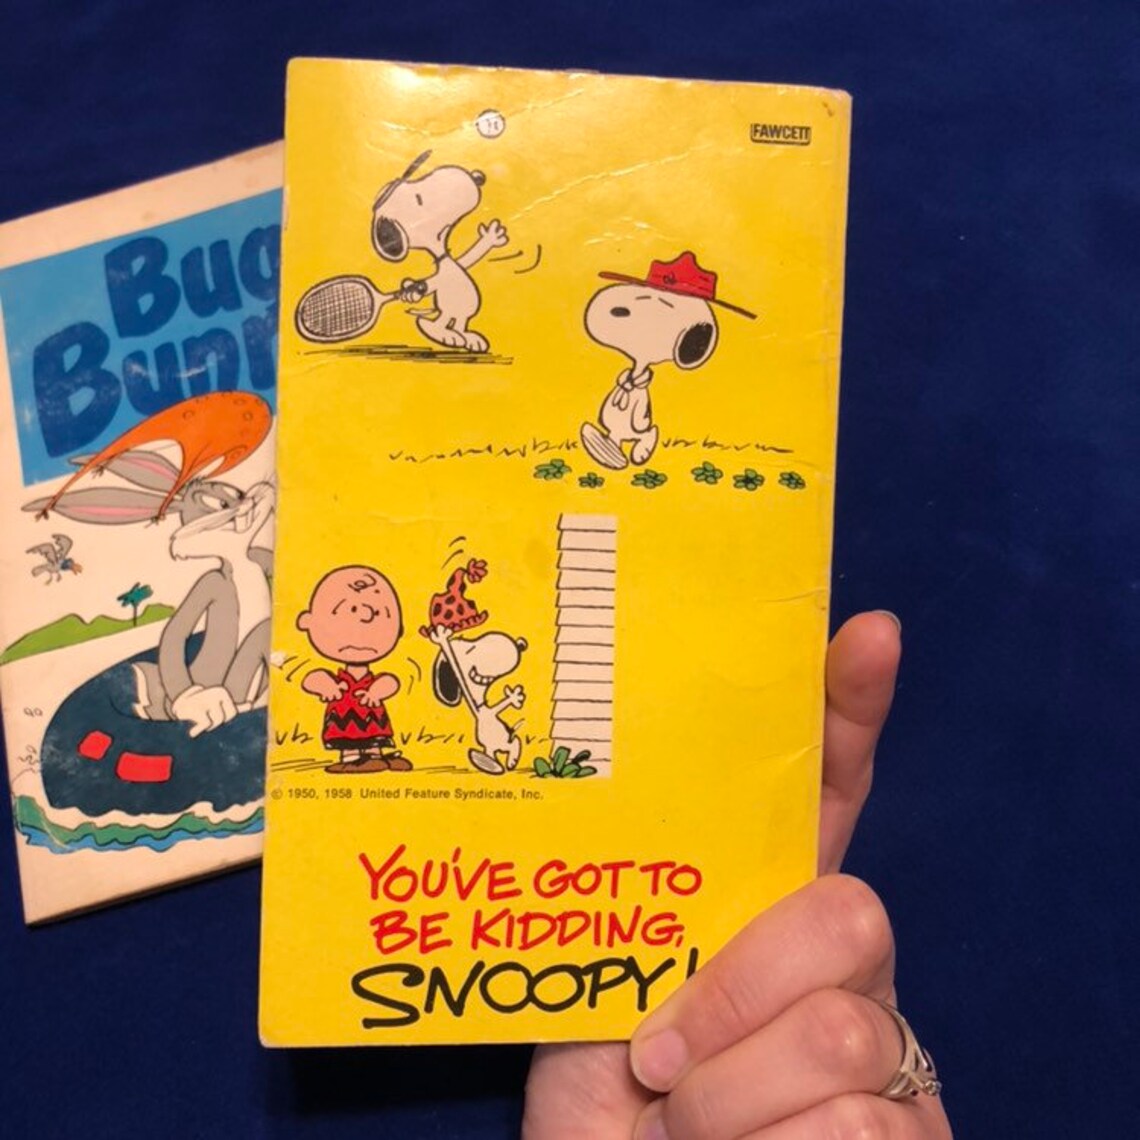 Vintage Comic Book Colections Snoopy and Bugs Bunny Comics - Etsy UK